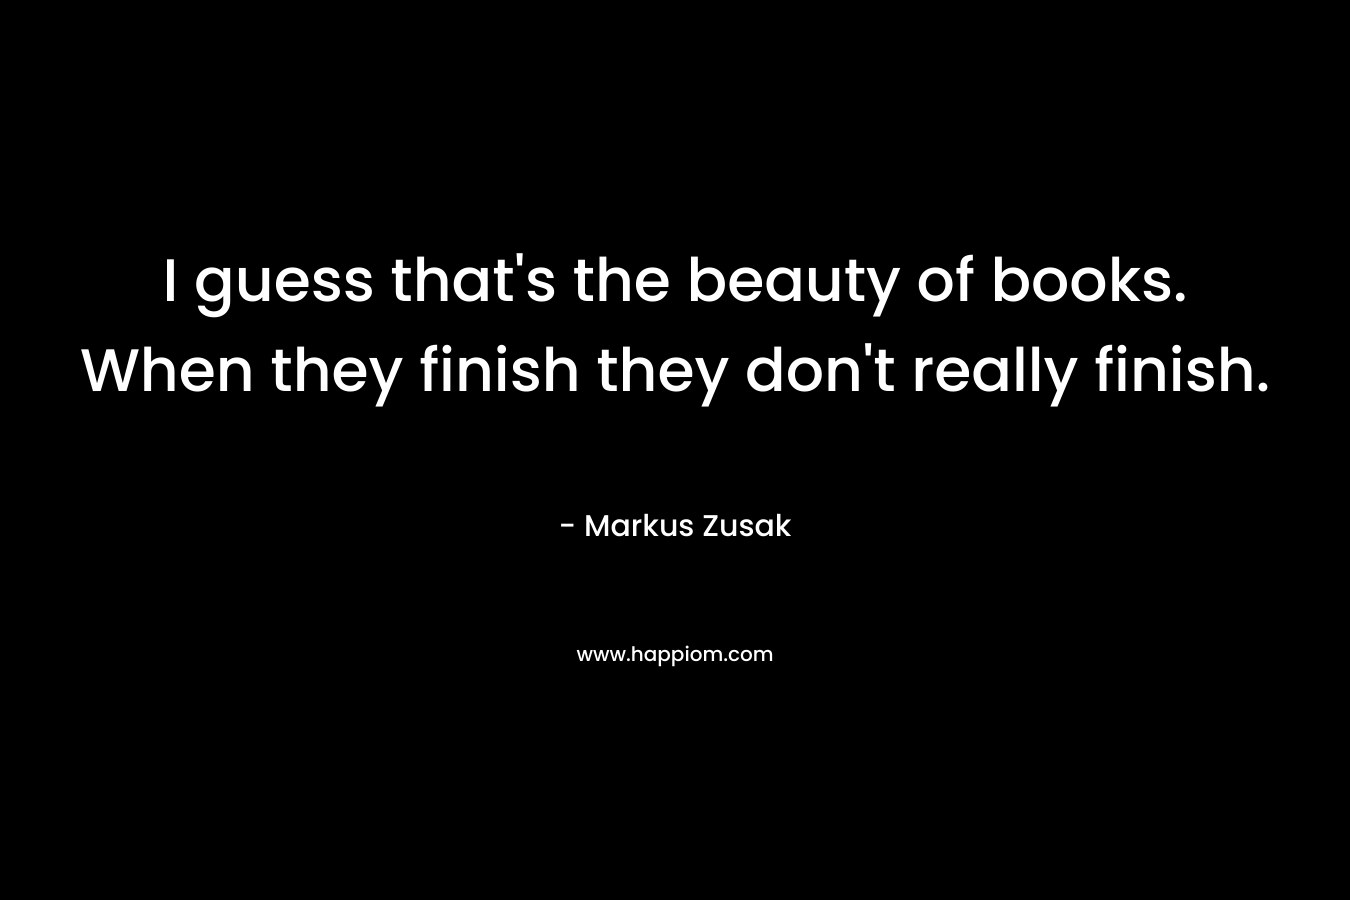 I guess that's the beauty of books. When they finish they don't really finish.